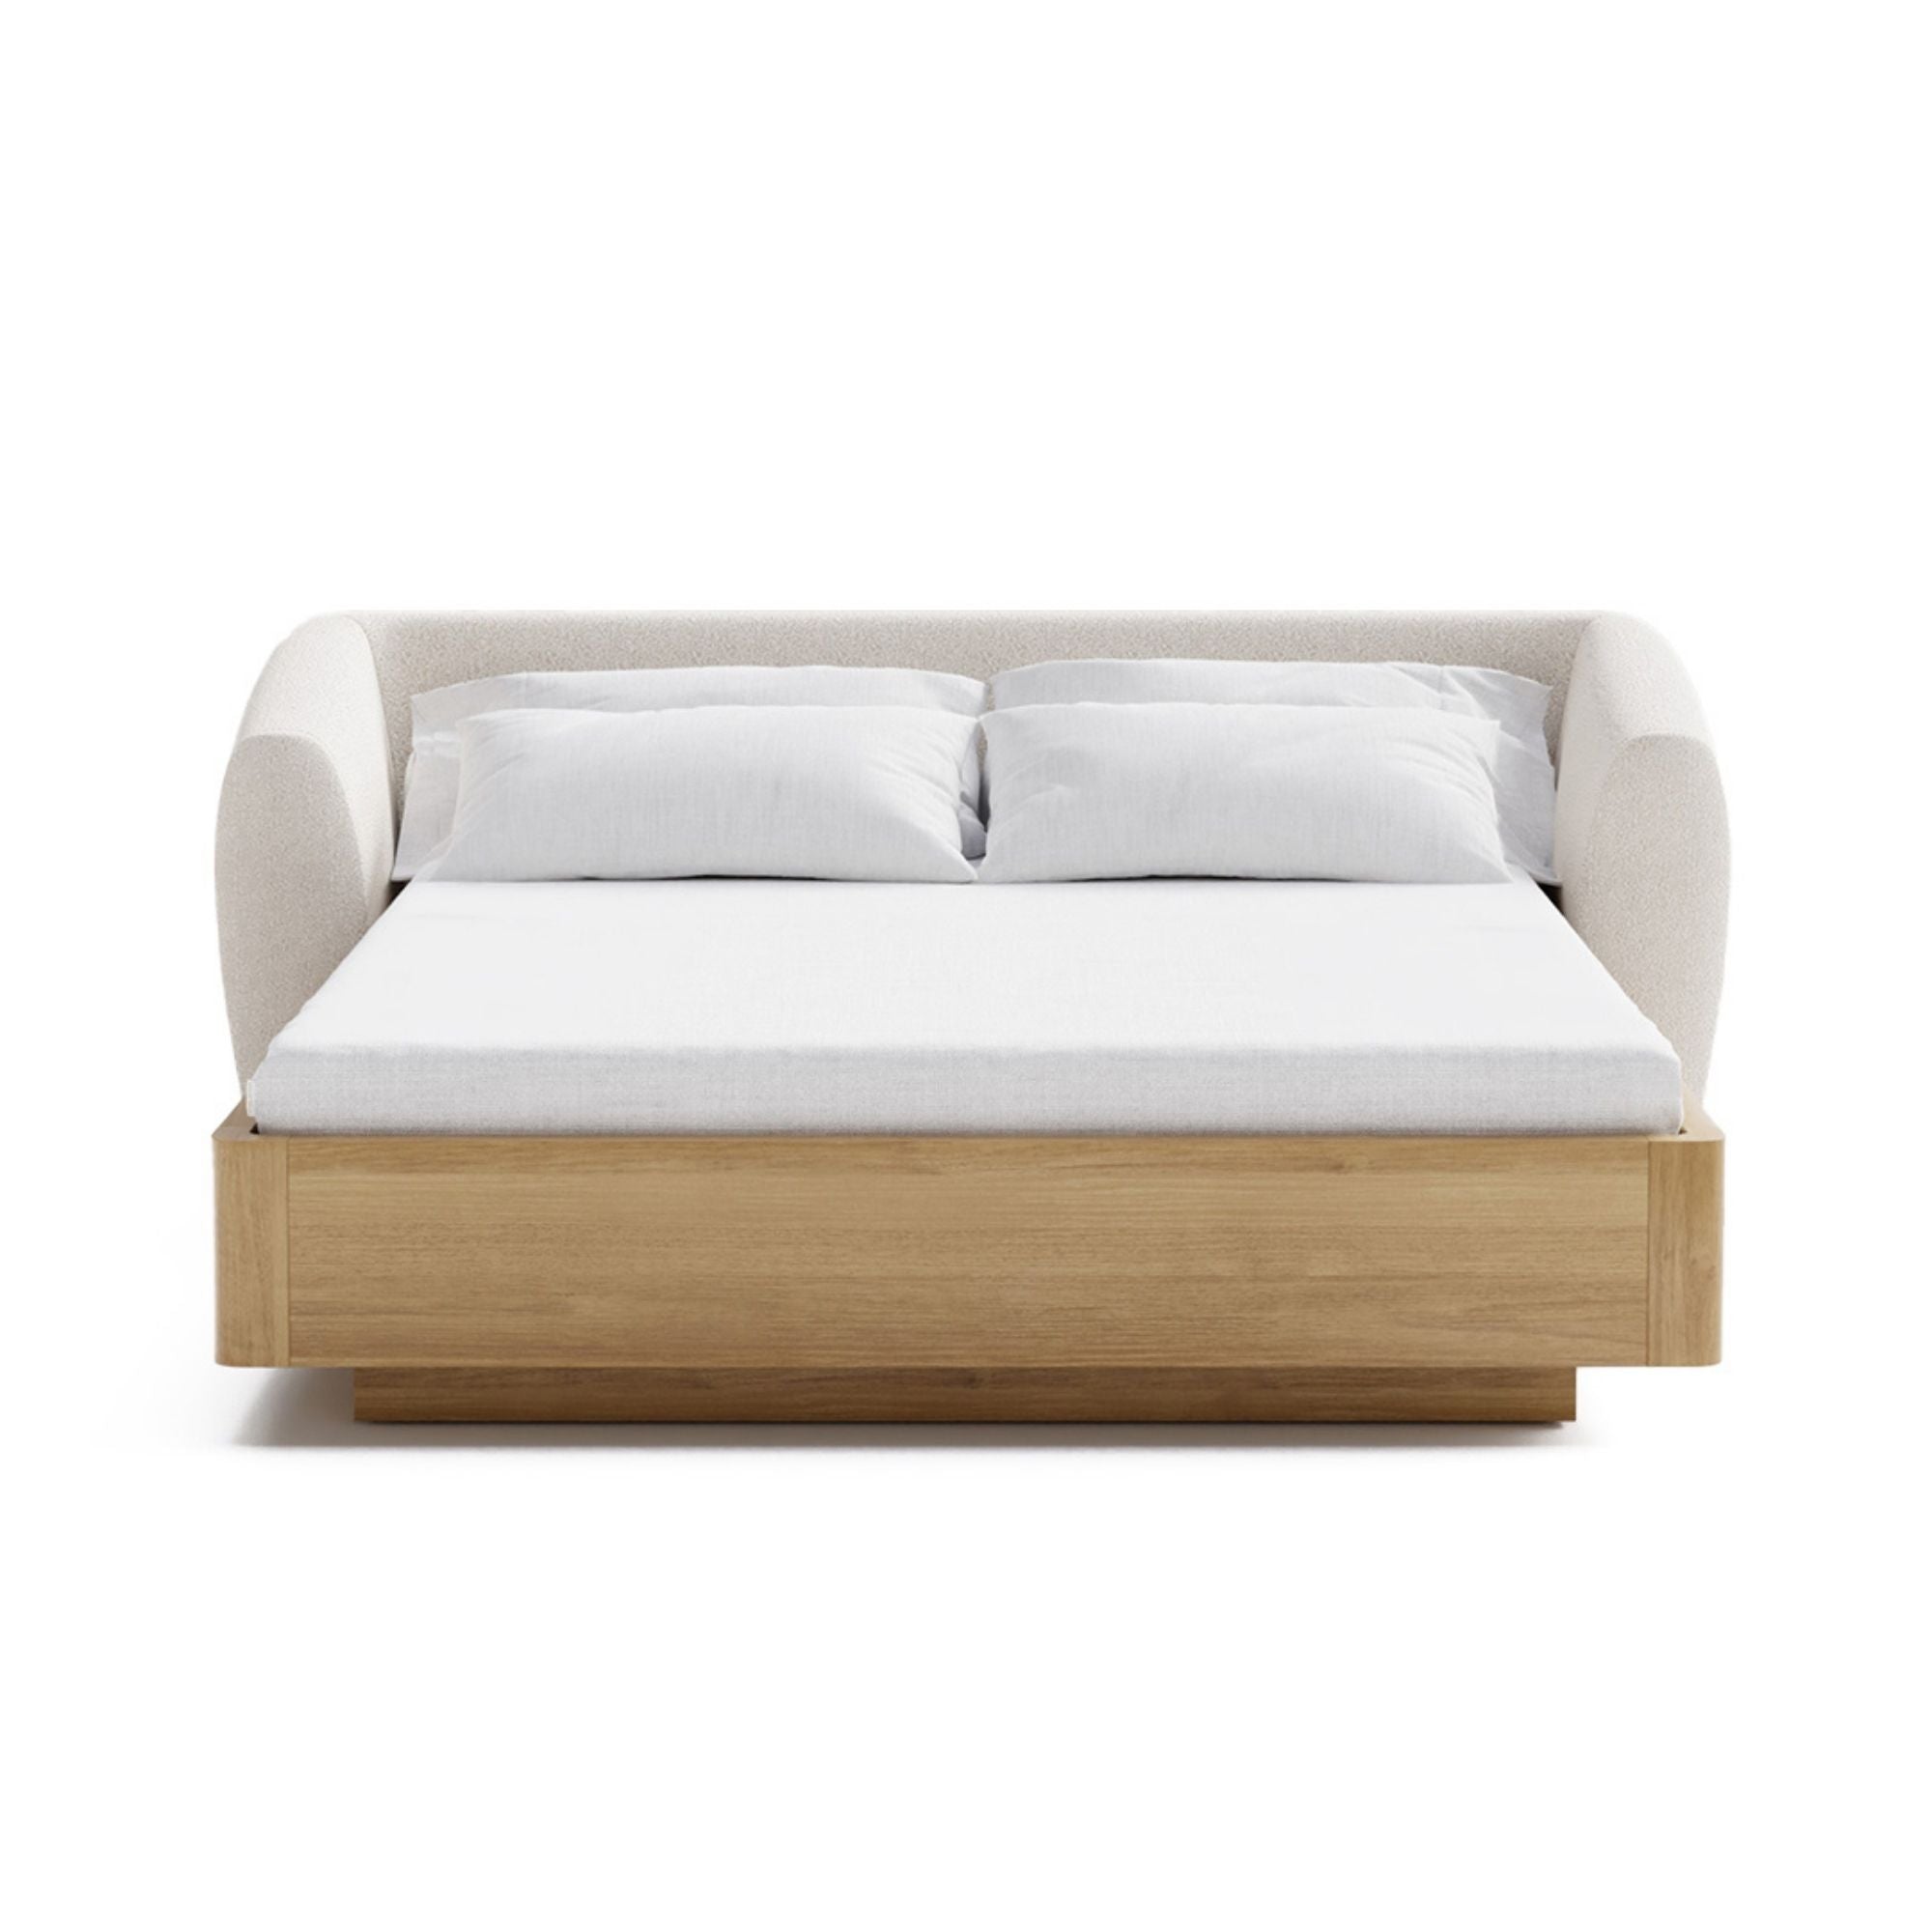 Nude Bed